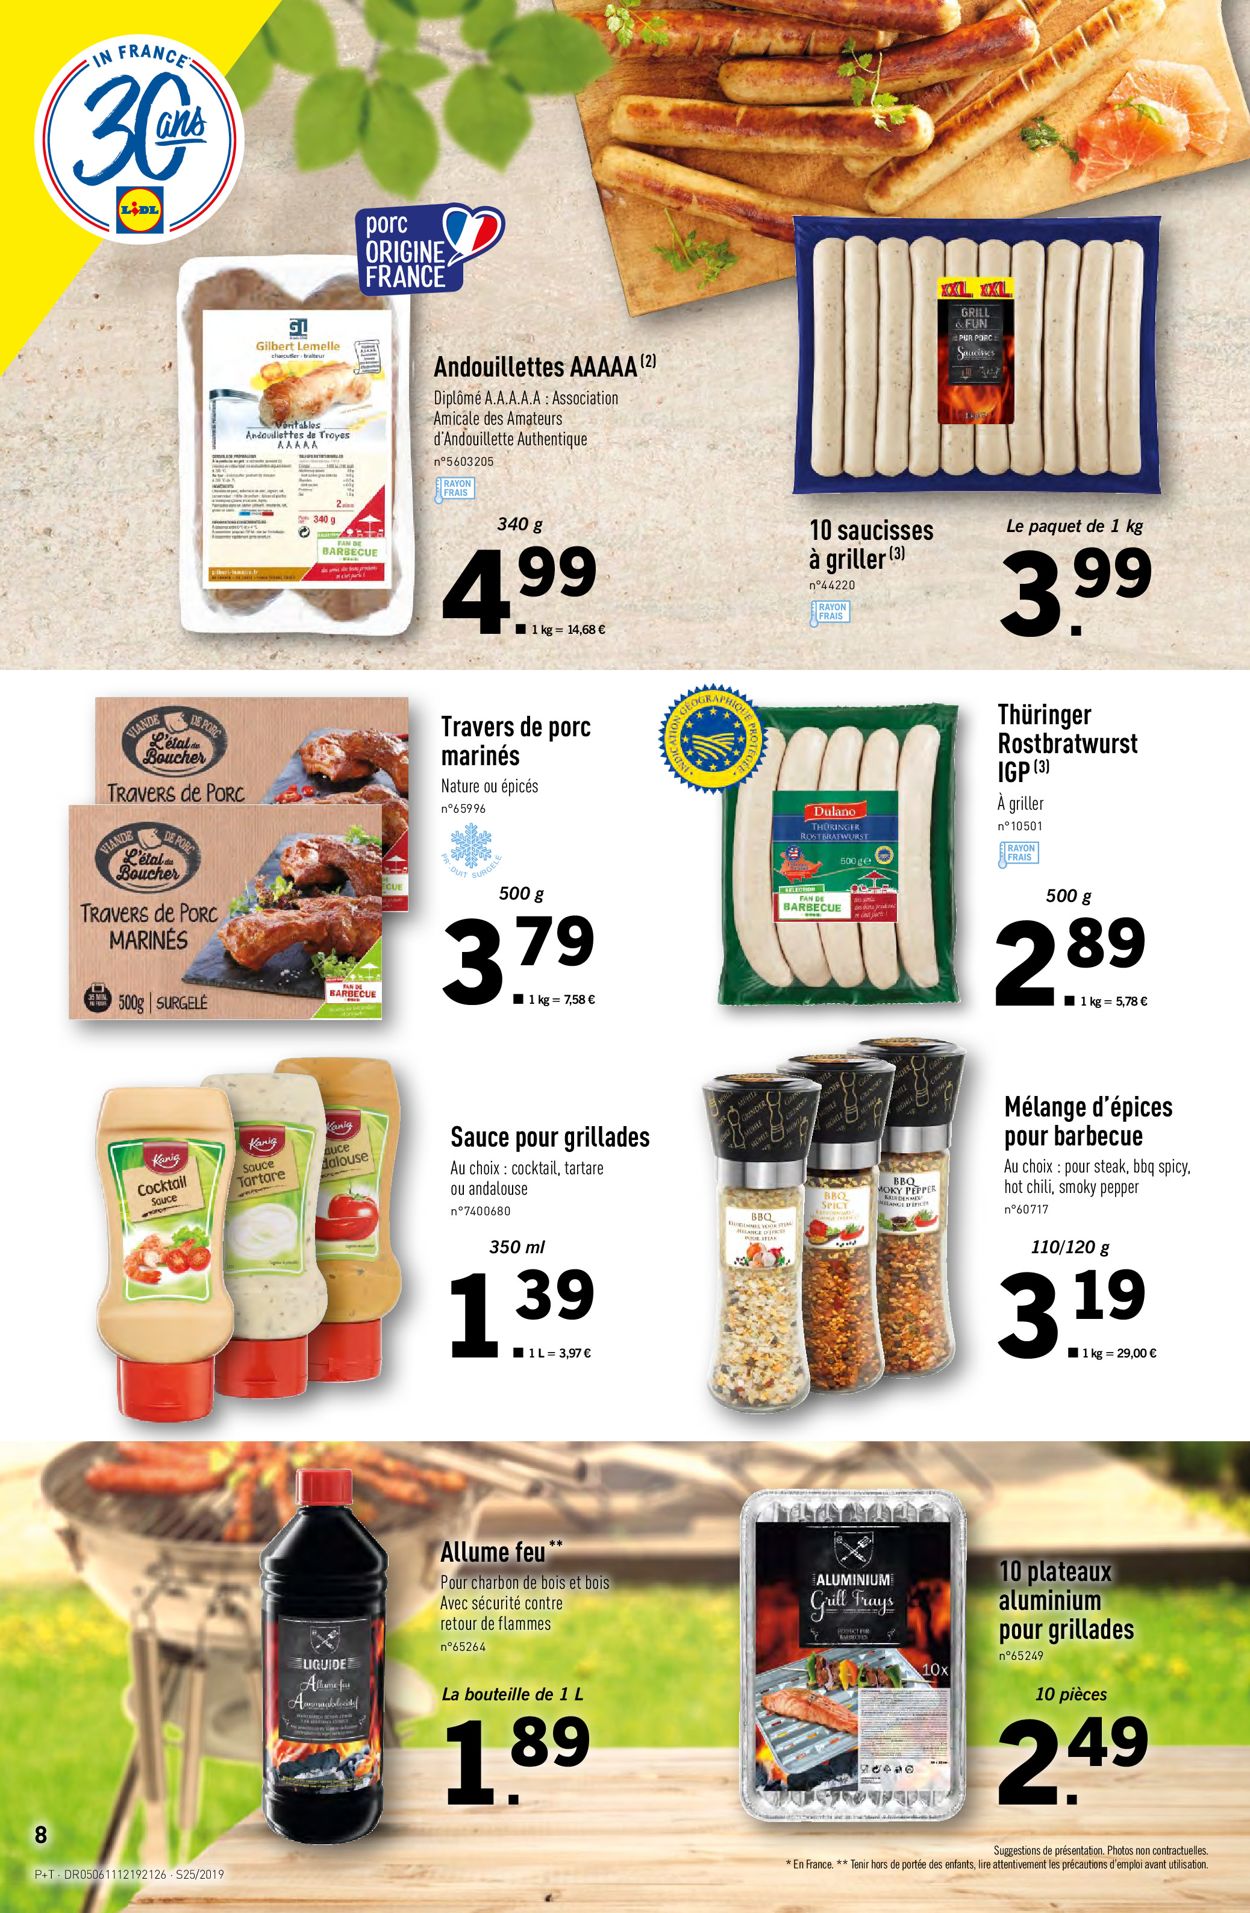 Lidl Catalogue - 19.06-25.06.2019 (Page 8)